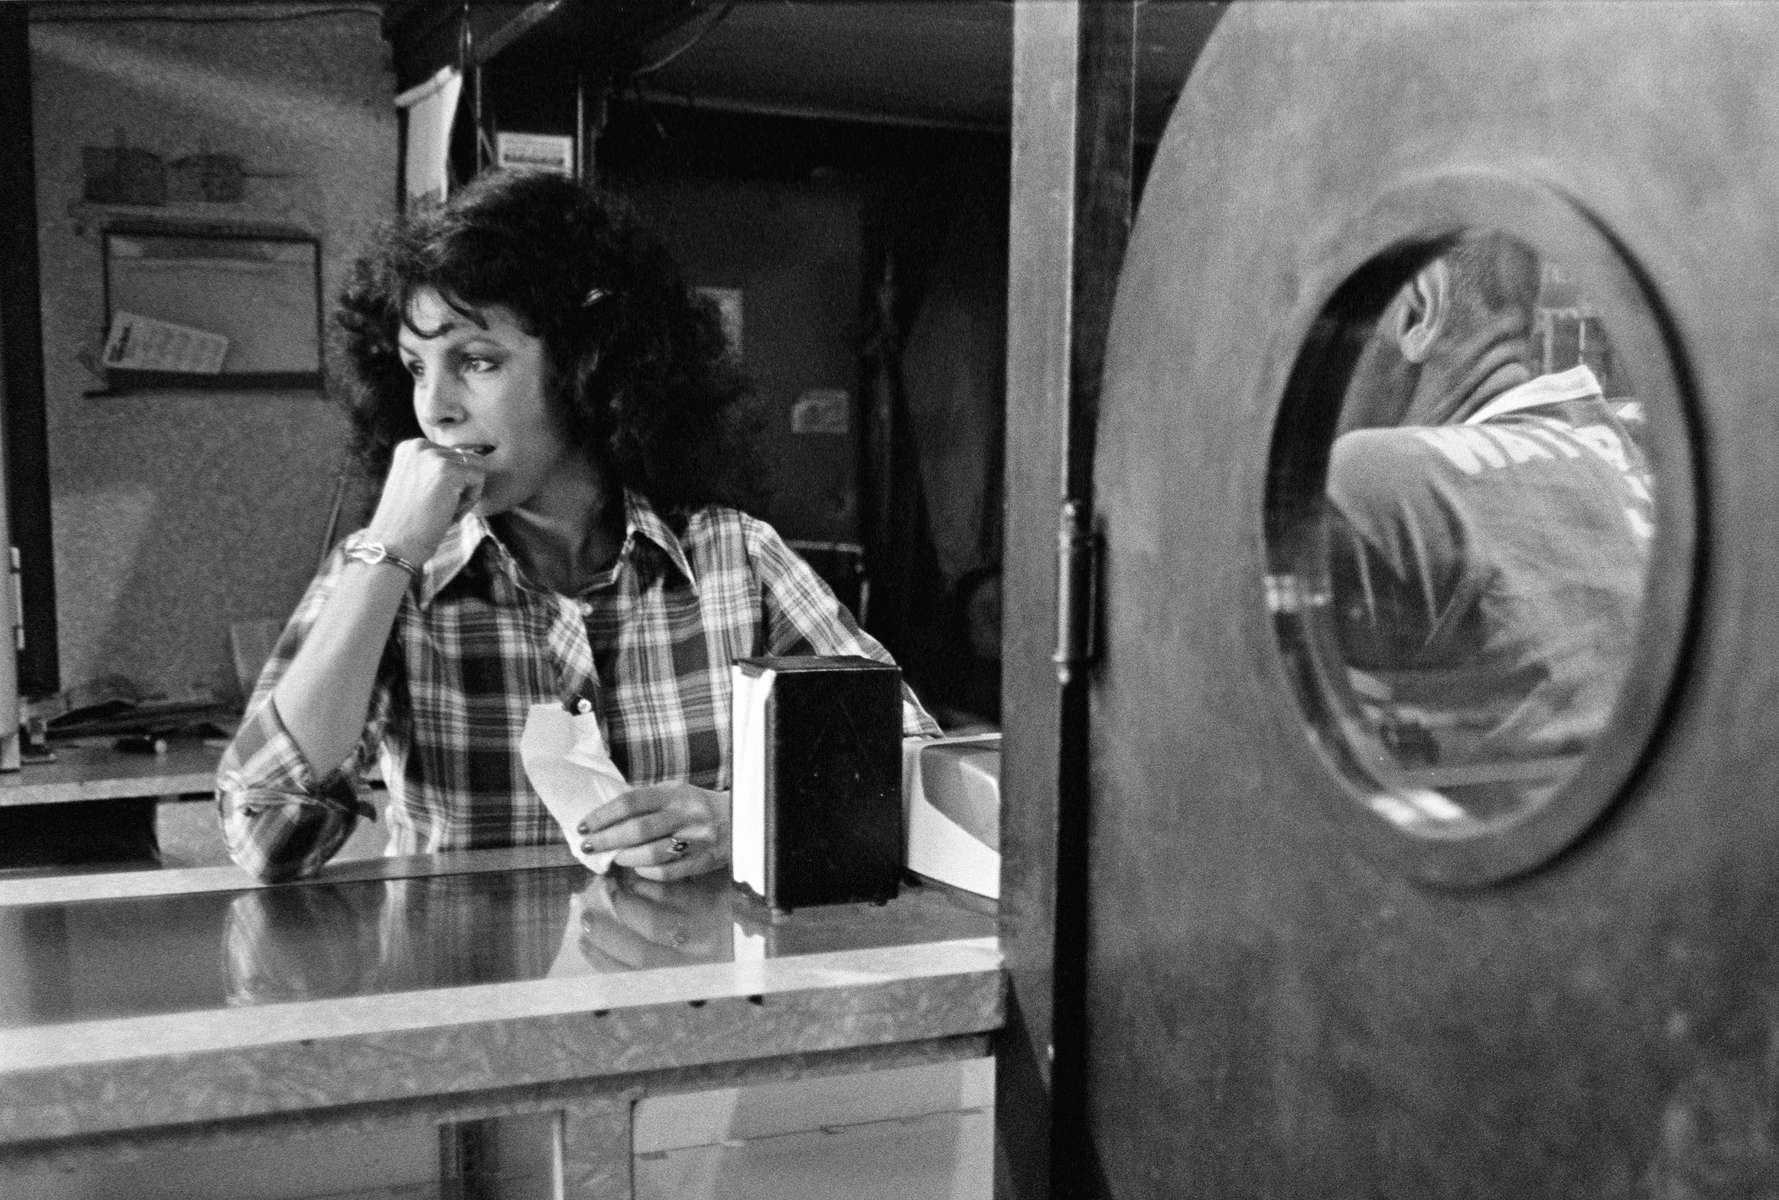 Woman barkeeper perhaps daydreaming of places far removed from where she works, West Virginia, 1978. At one point, more than 100,000 West Virginians worked in the mines that produced well-paying jobs. Now there are fewer than 20,000, and the jobs that do exist pay far less than they used to, thanks to successful anti-union actions by coal companies. Coal counties in Appalachia suffer high rates of heart disease, obesity, smoking, diabetes, and opioid abuse, leading them to have some of the lowest life expectancies in the country.  Jon Chase photo